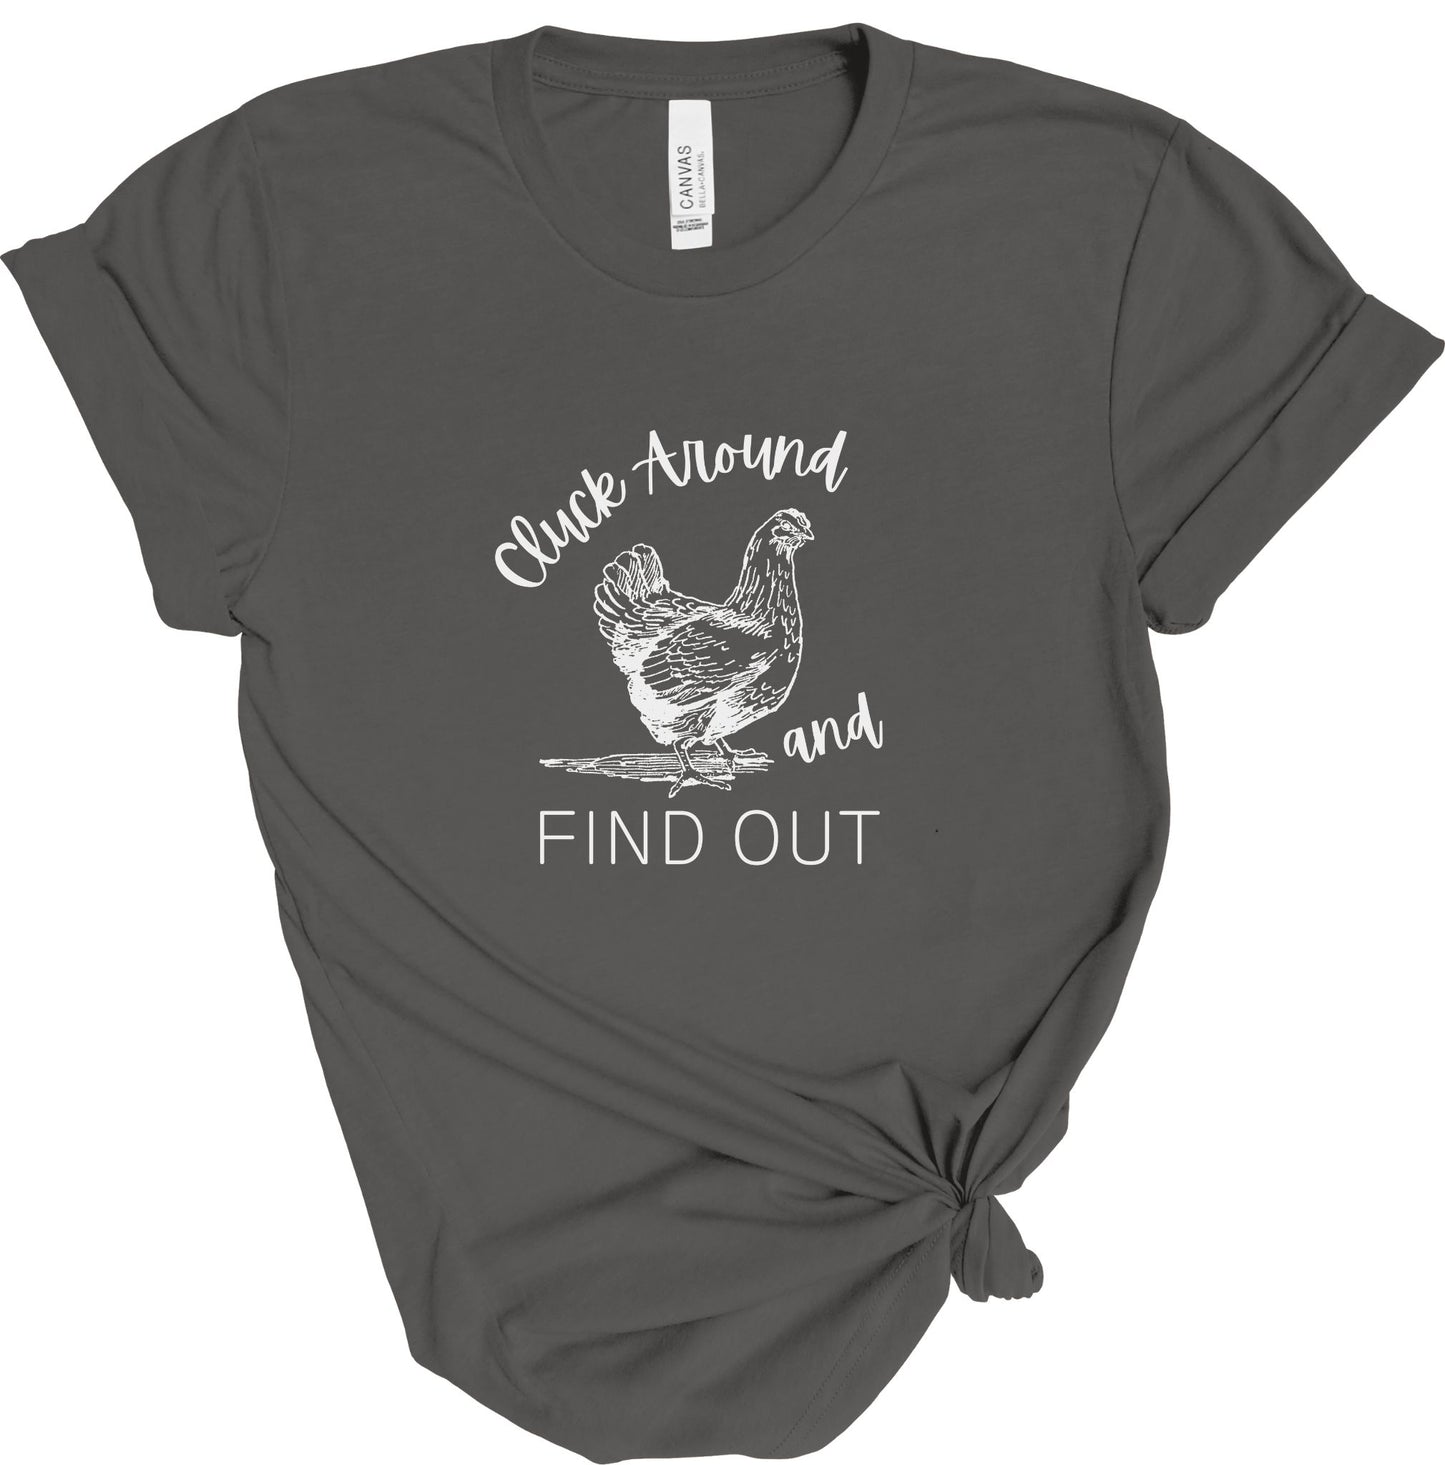 CLUCK AROUND AND FIND OUT TEE